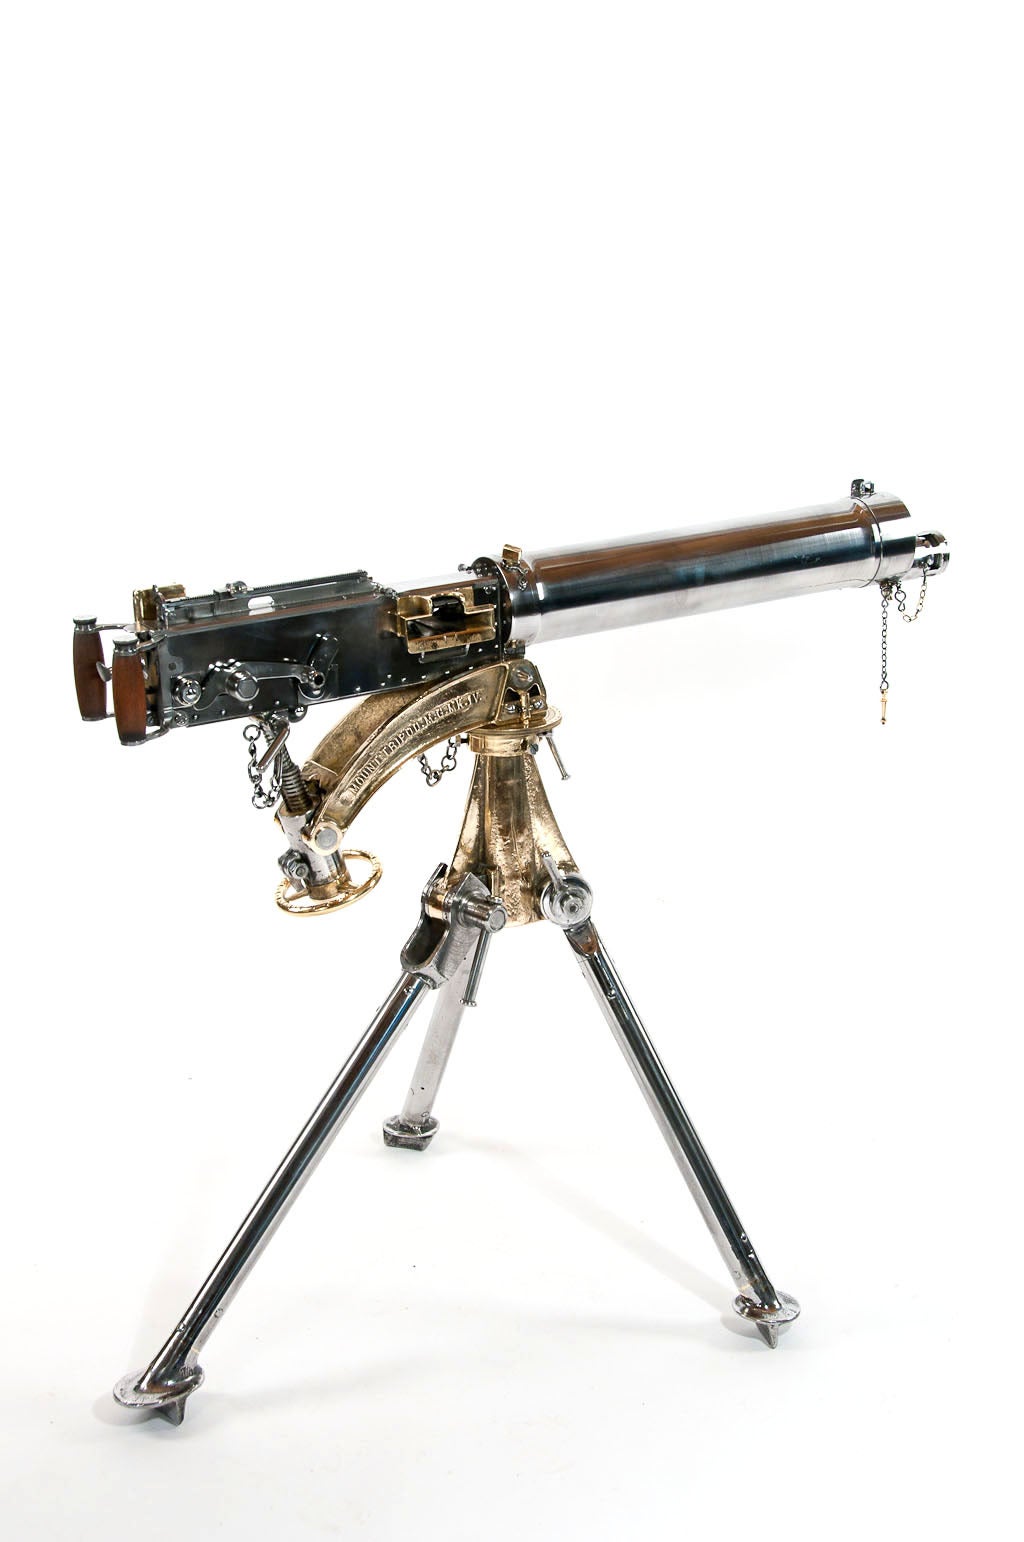 An extremely rare fully polished Vickers Machine Gun on tripod. In stunning condition this WW2 Vickers .303 Heavy Machine Gun dated 1942 to the tripod is a fully functional deactivated smooth jacket water cooled model with stamped serial number